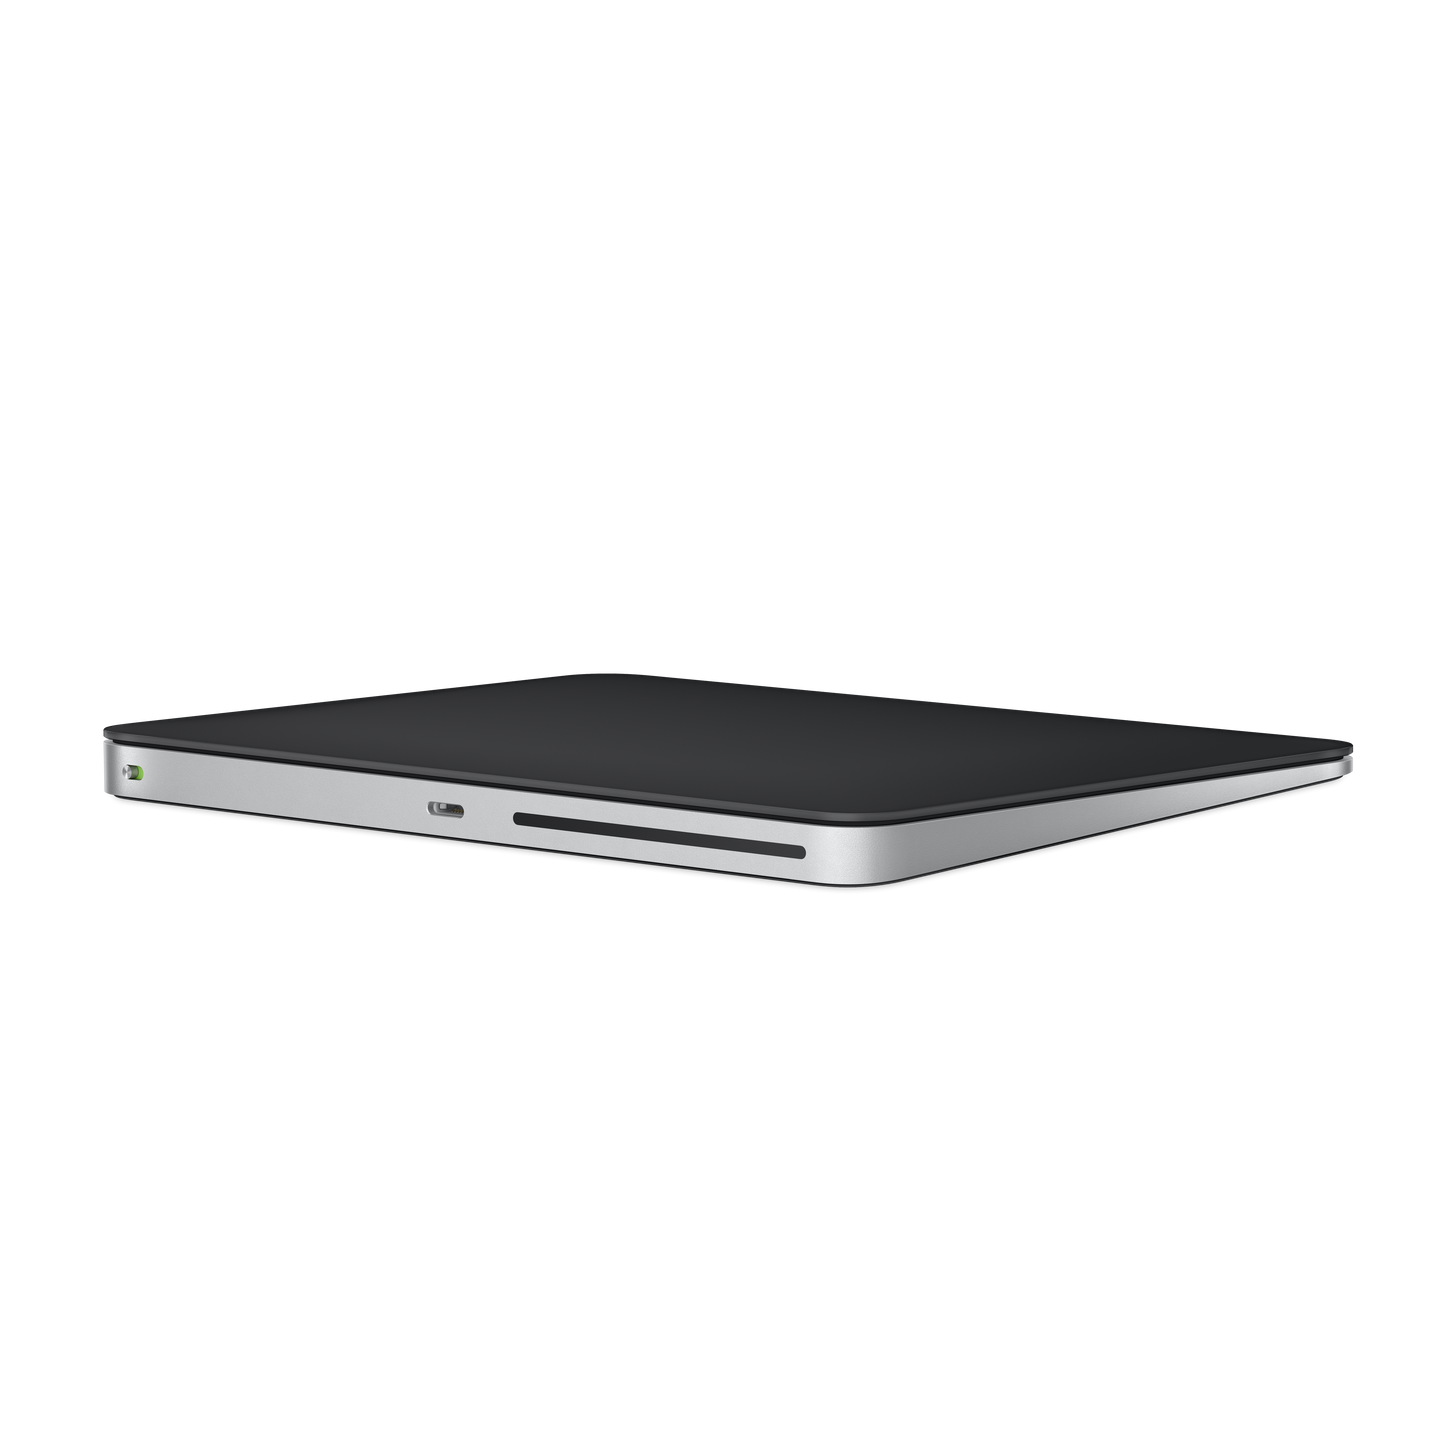 Magic Trackpad - Superficie Multi‑Touch negra - Rossellimac